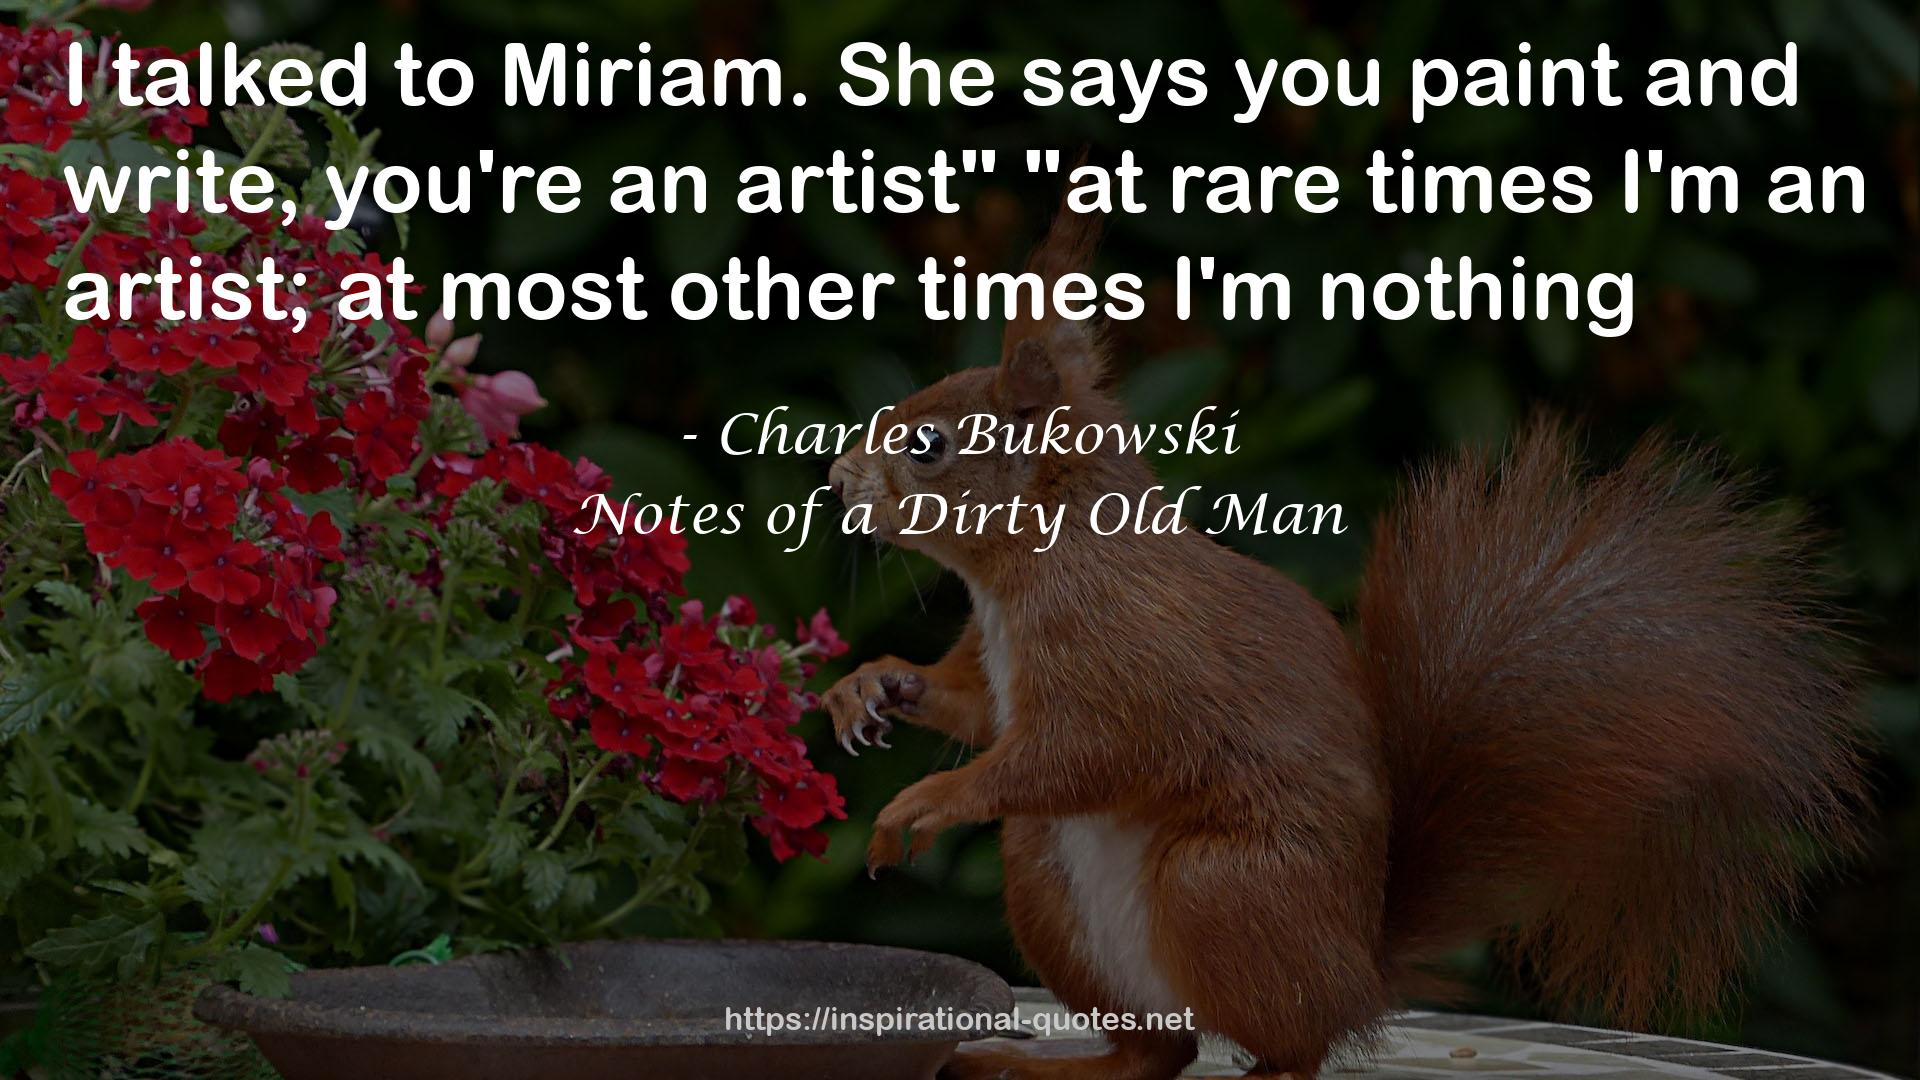 Notes of a Dirty Old Man QUOTES